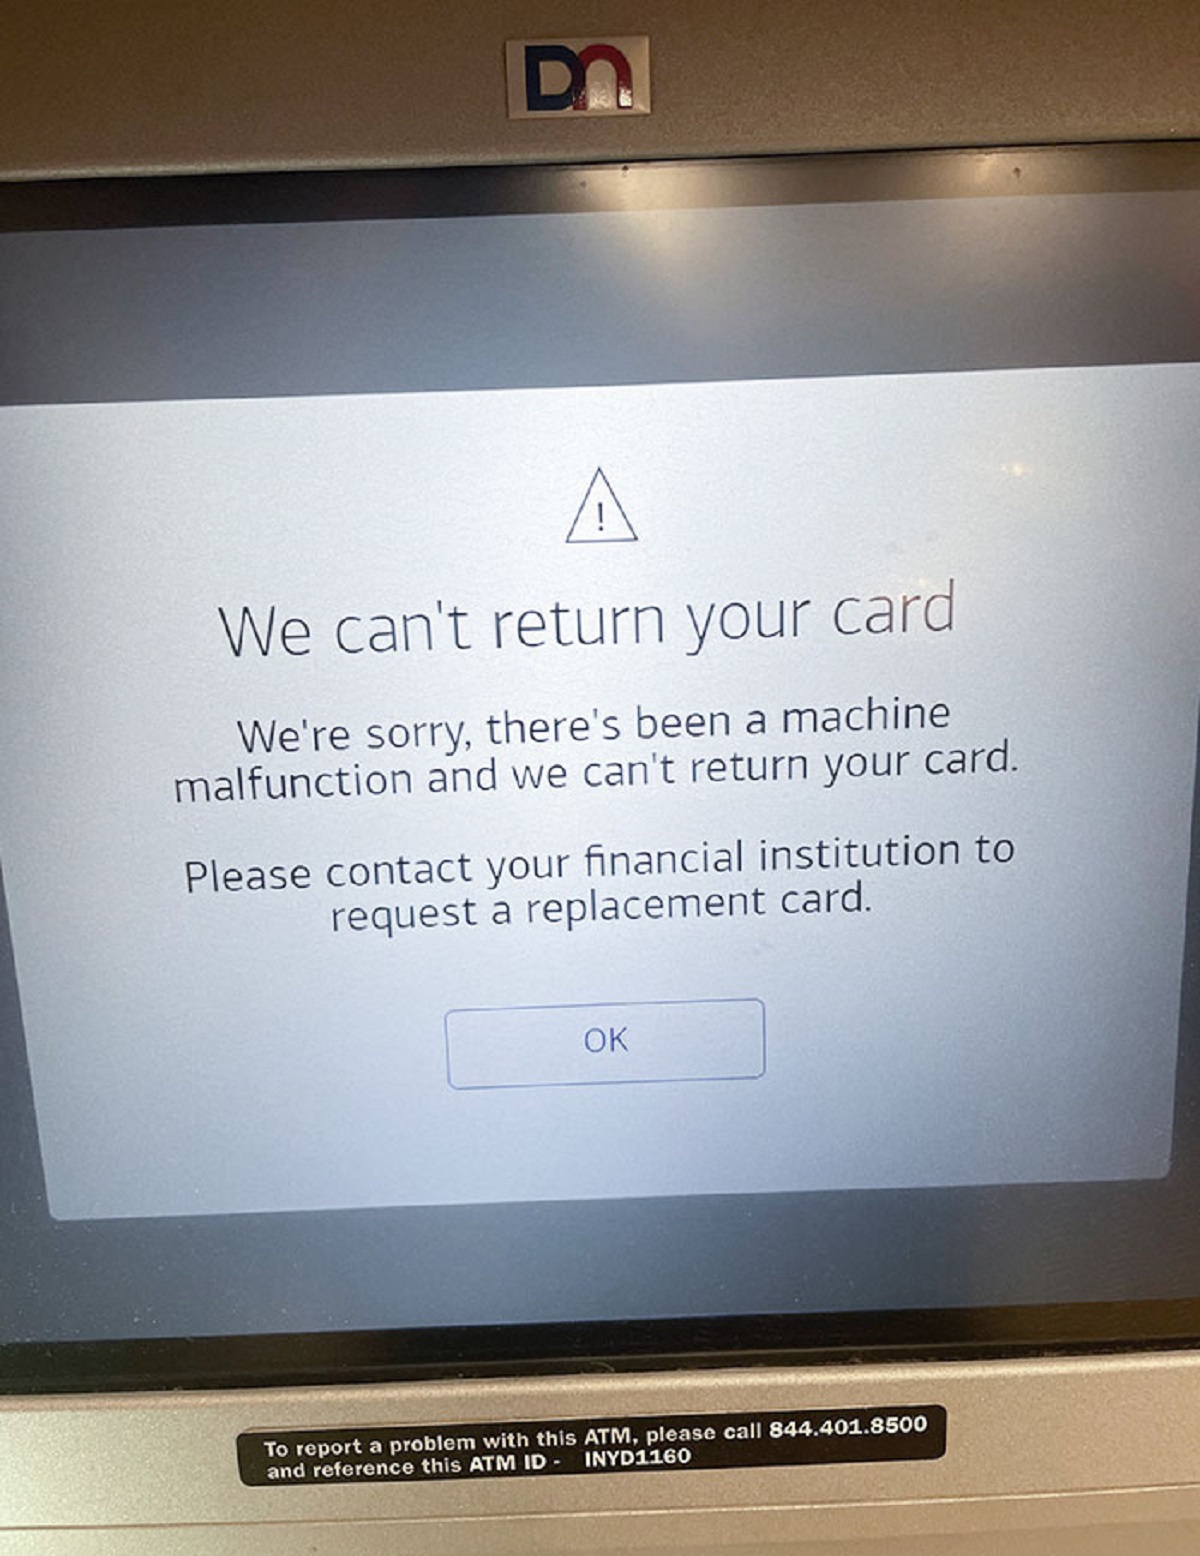 screen - Do A We can't return your card We're sorry, there's been a machine malfunction and we can't return your card. Please contact your financial institution to request a replacement card. Ok To report a problem with this Atm, please call 844.401.8500 